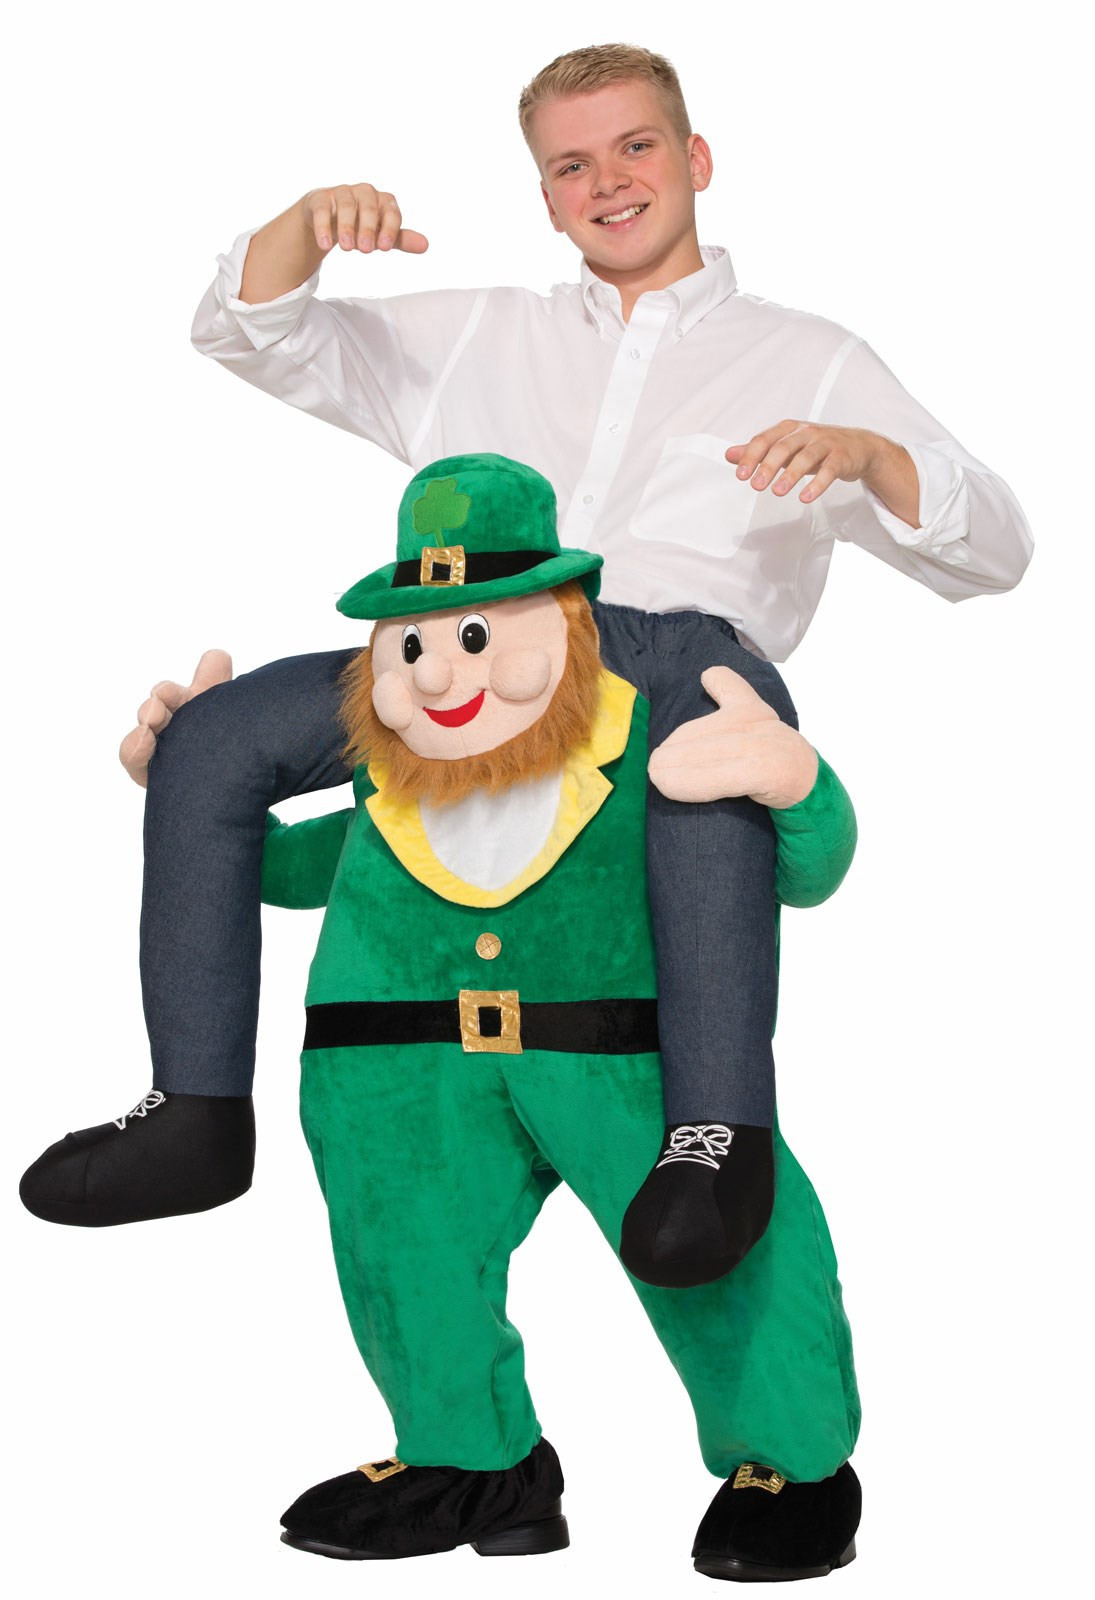 Party City St Patrick's Day Costumes
 Ride a St Patrick s Day Leprechaun Adult Costume